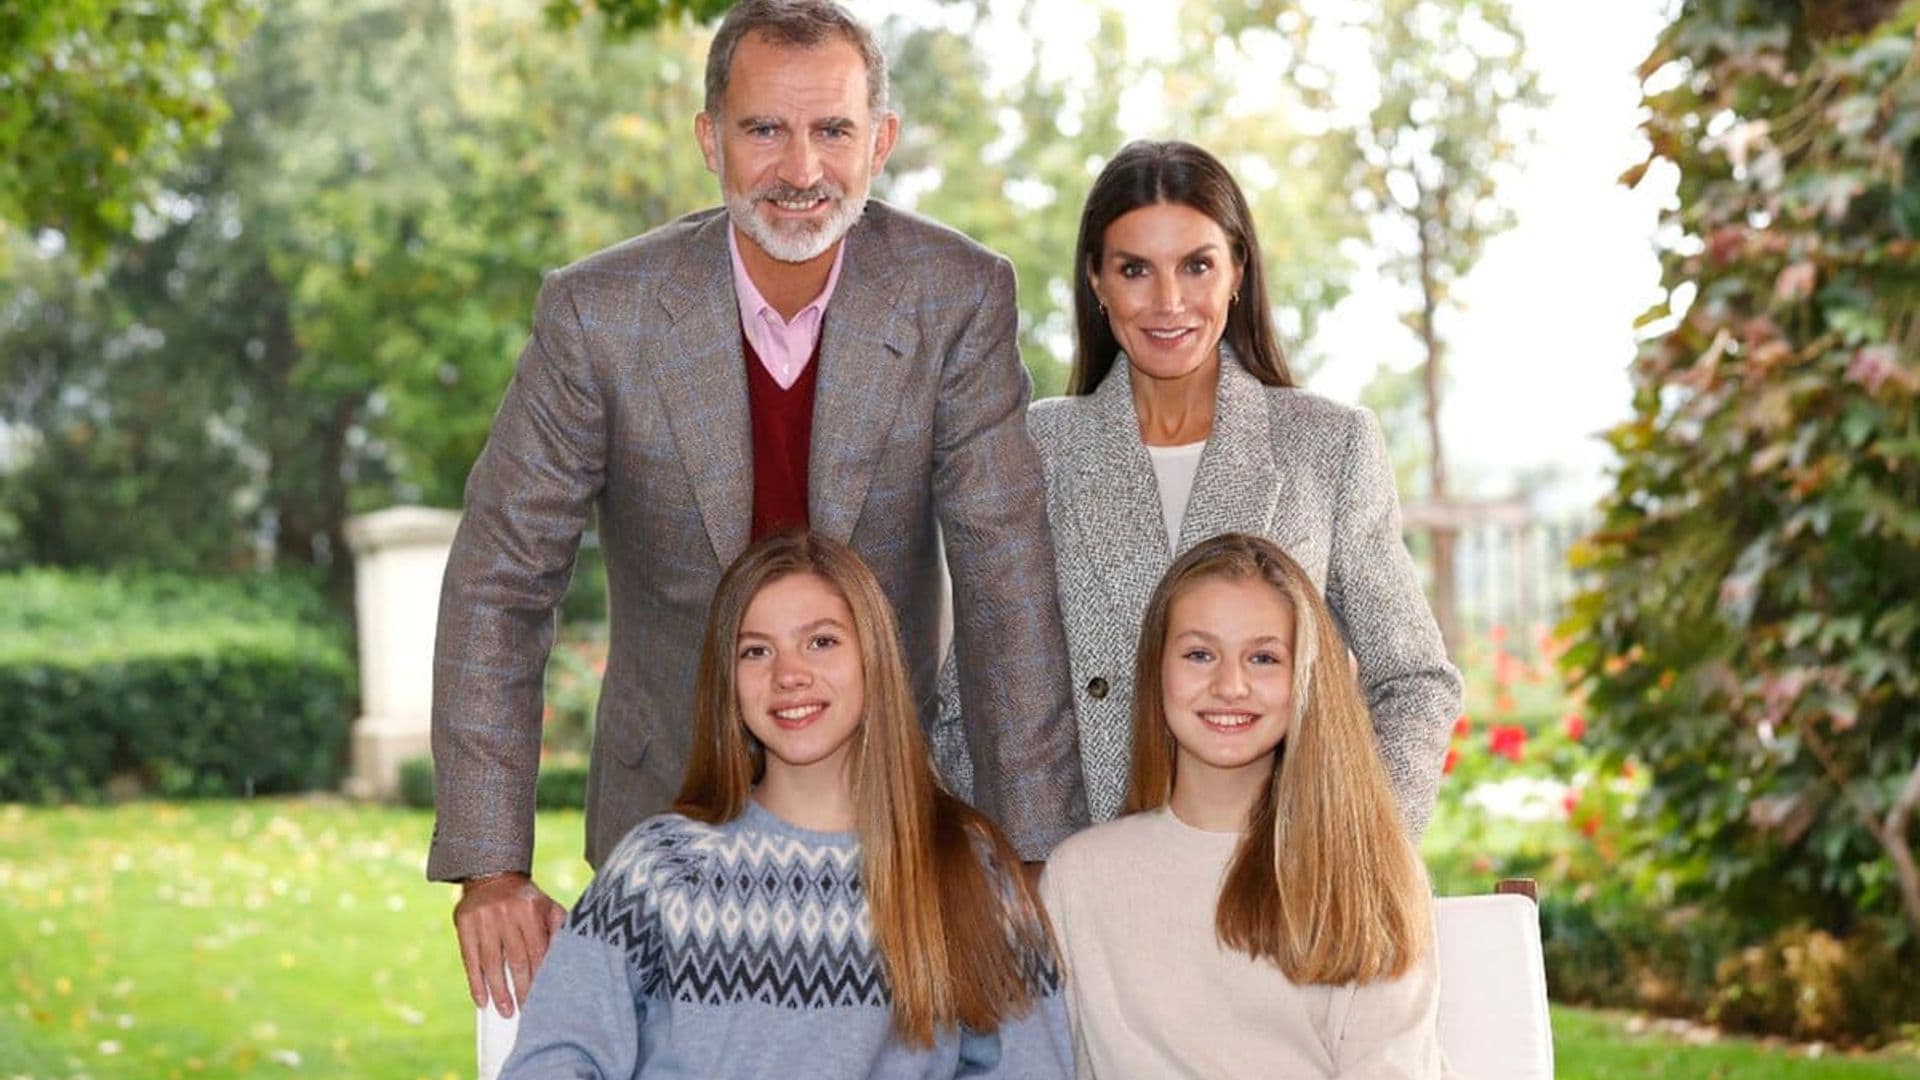 Spanish Princesses' sisterly love on display in family Christmas card